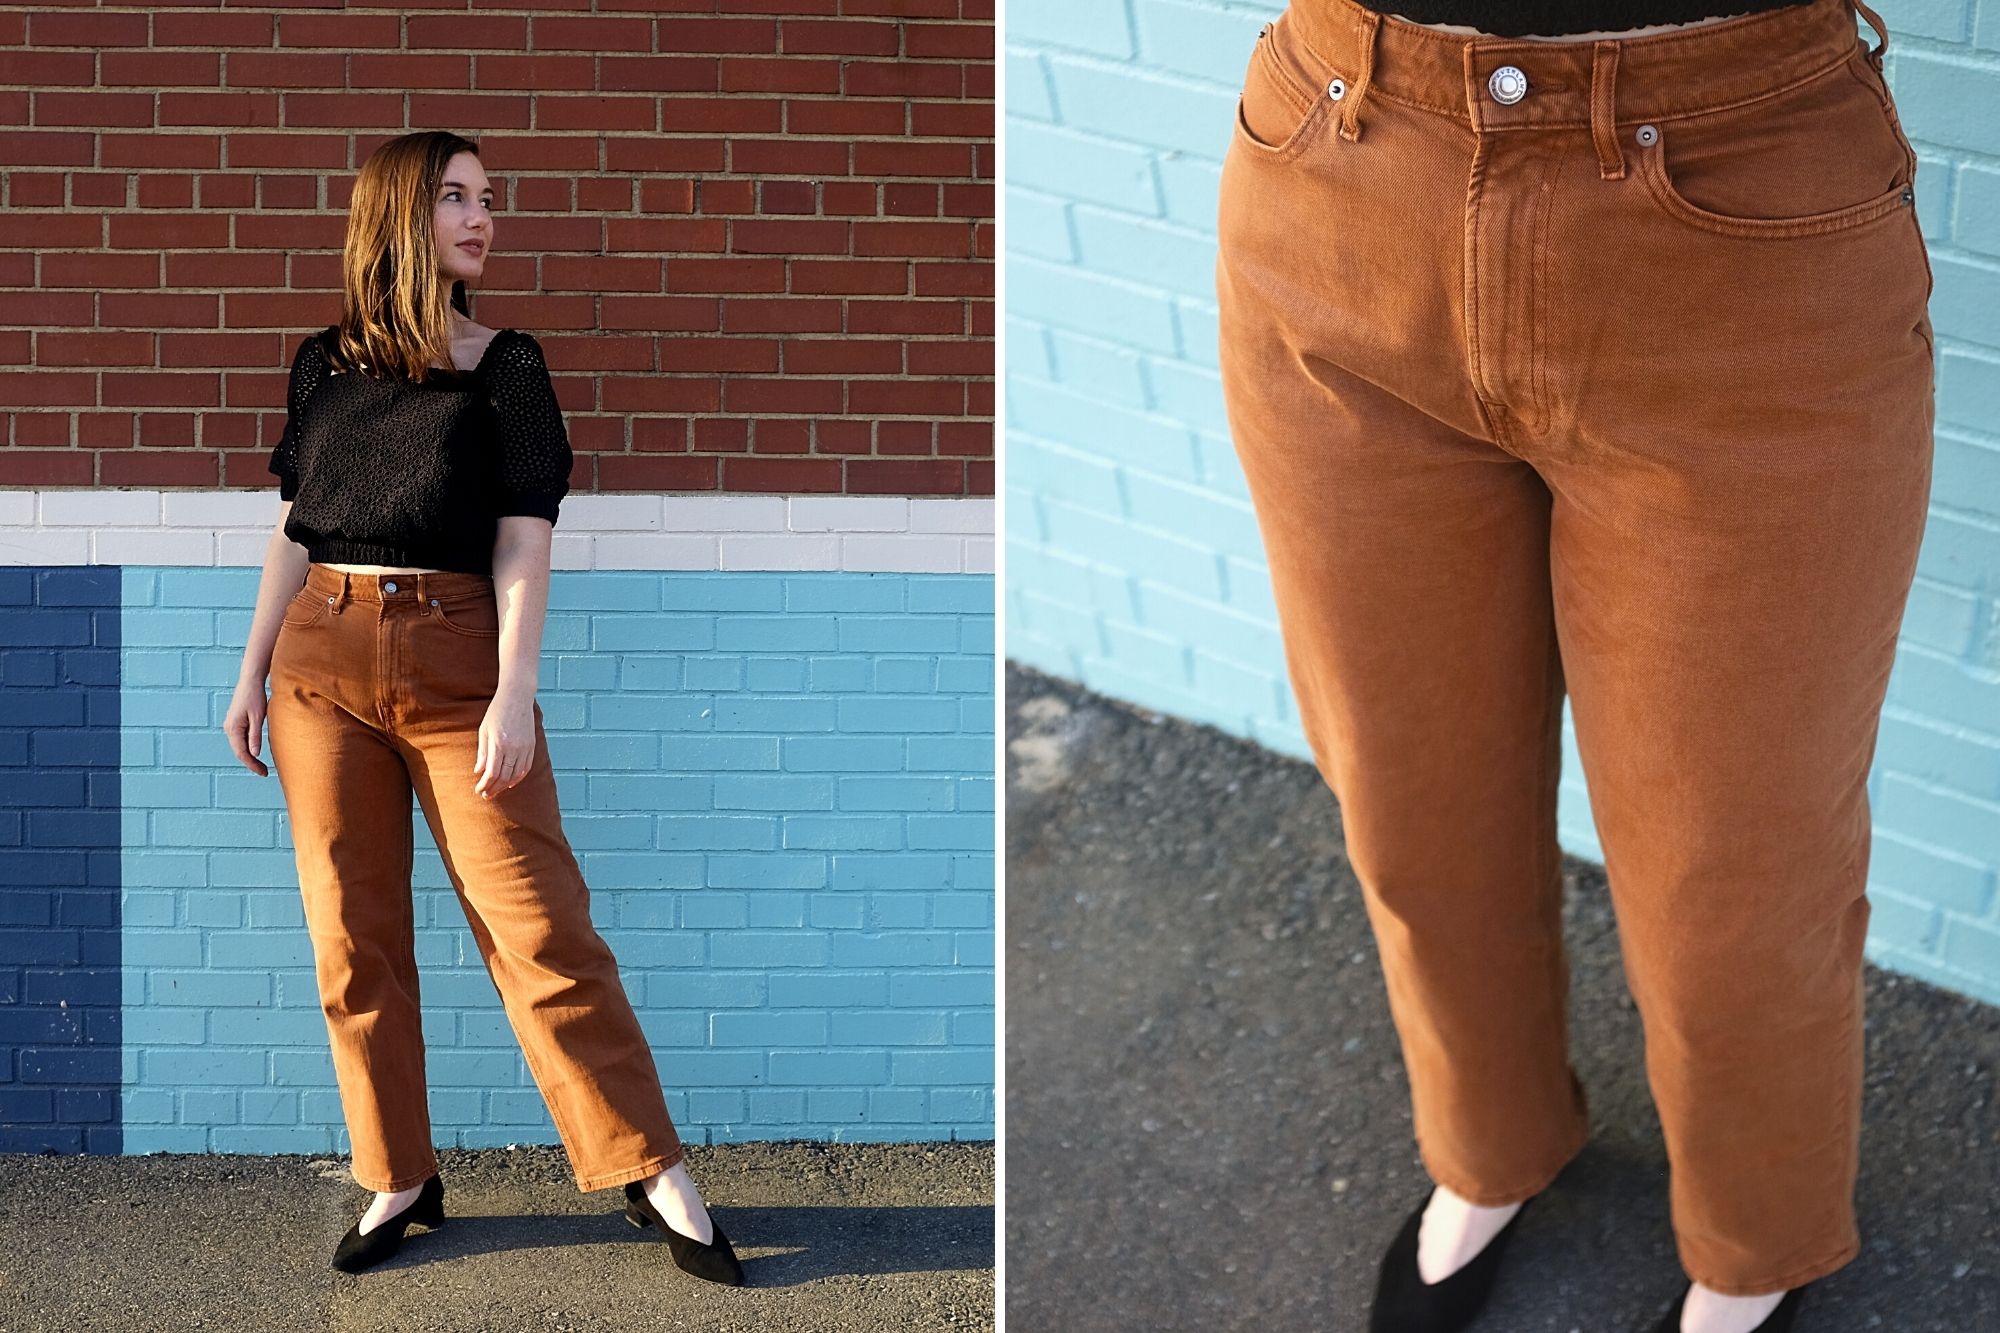 Alyssa wears The Curvy Way-High Jean℅ in two images